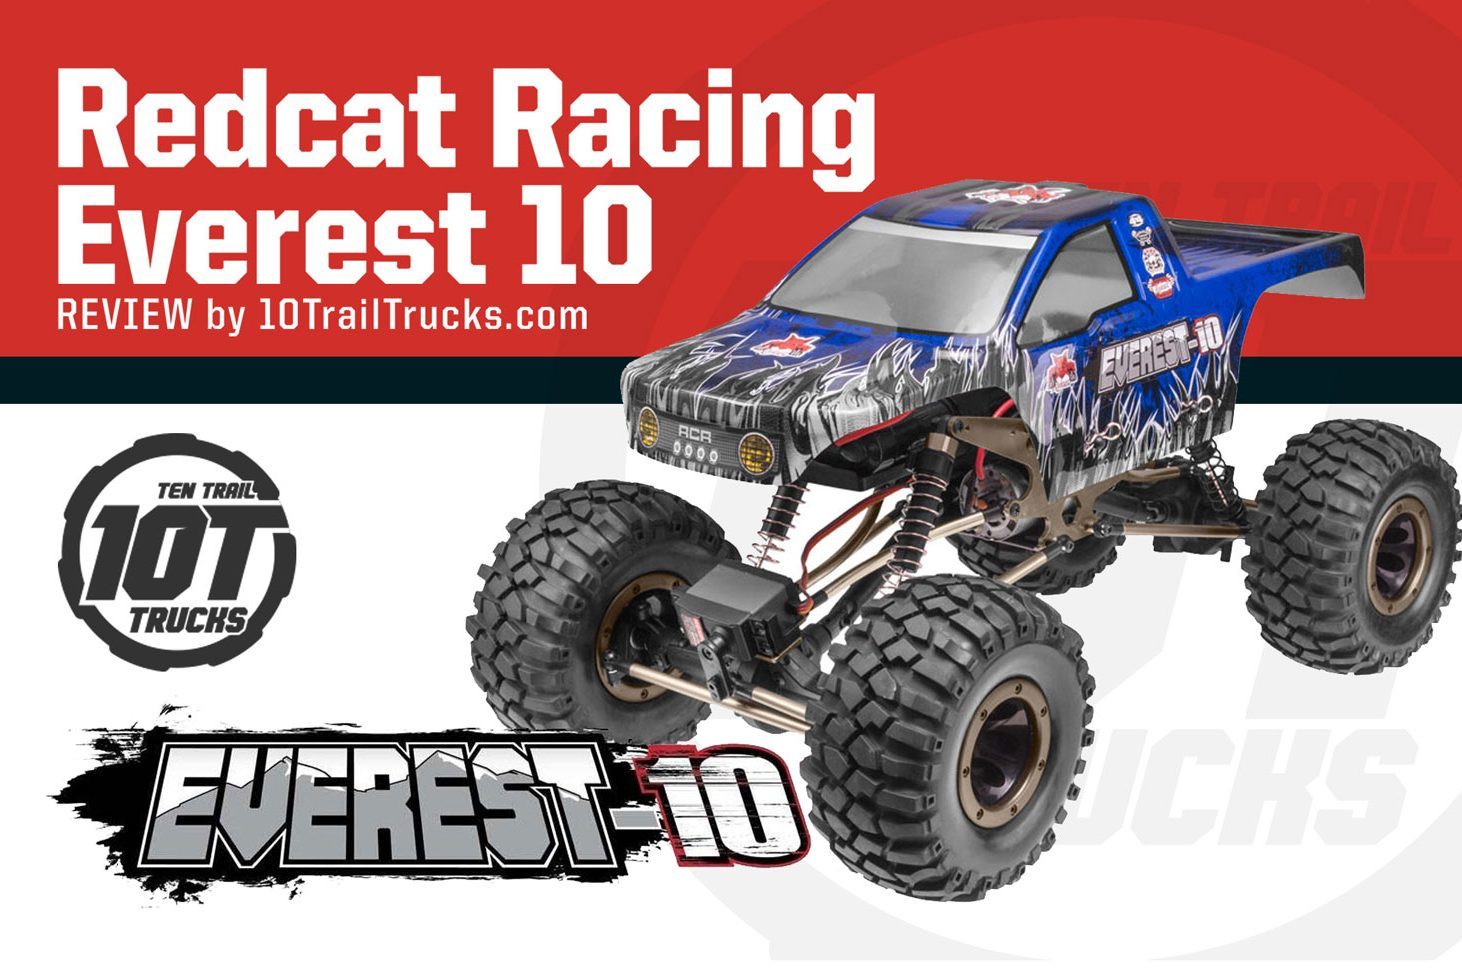 RedCat Racing Everest 10 Review